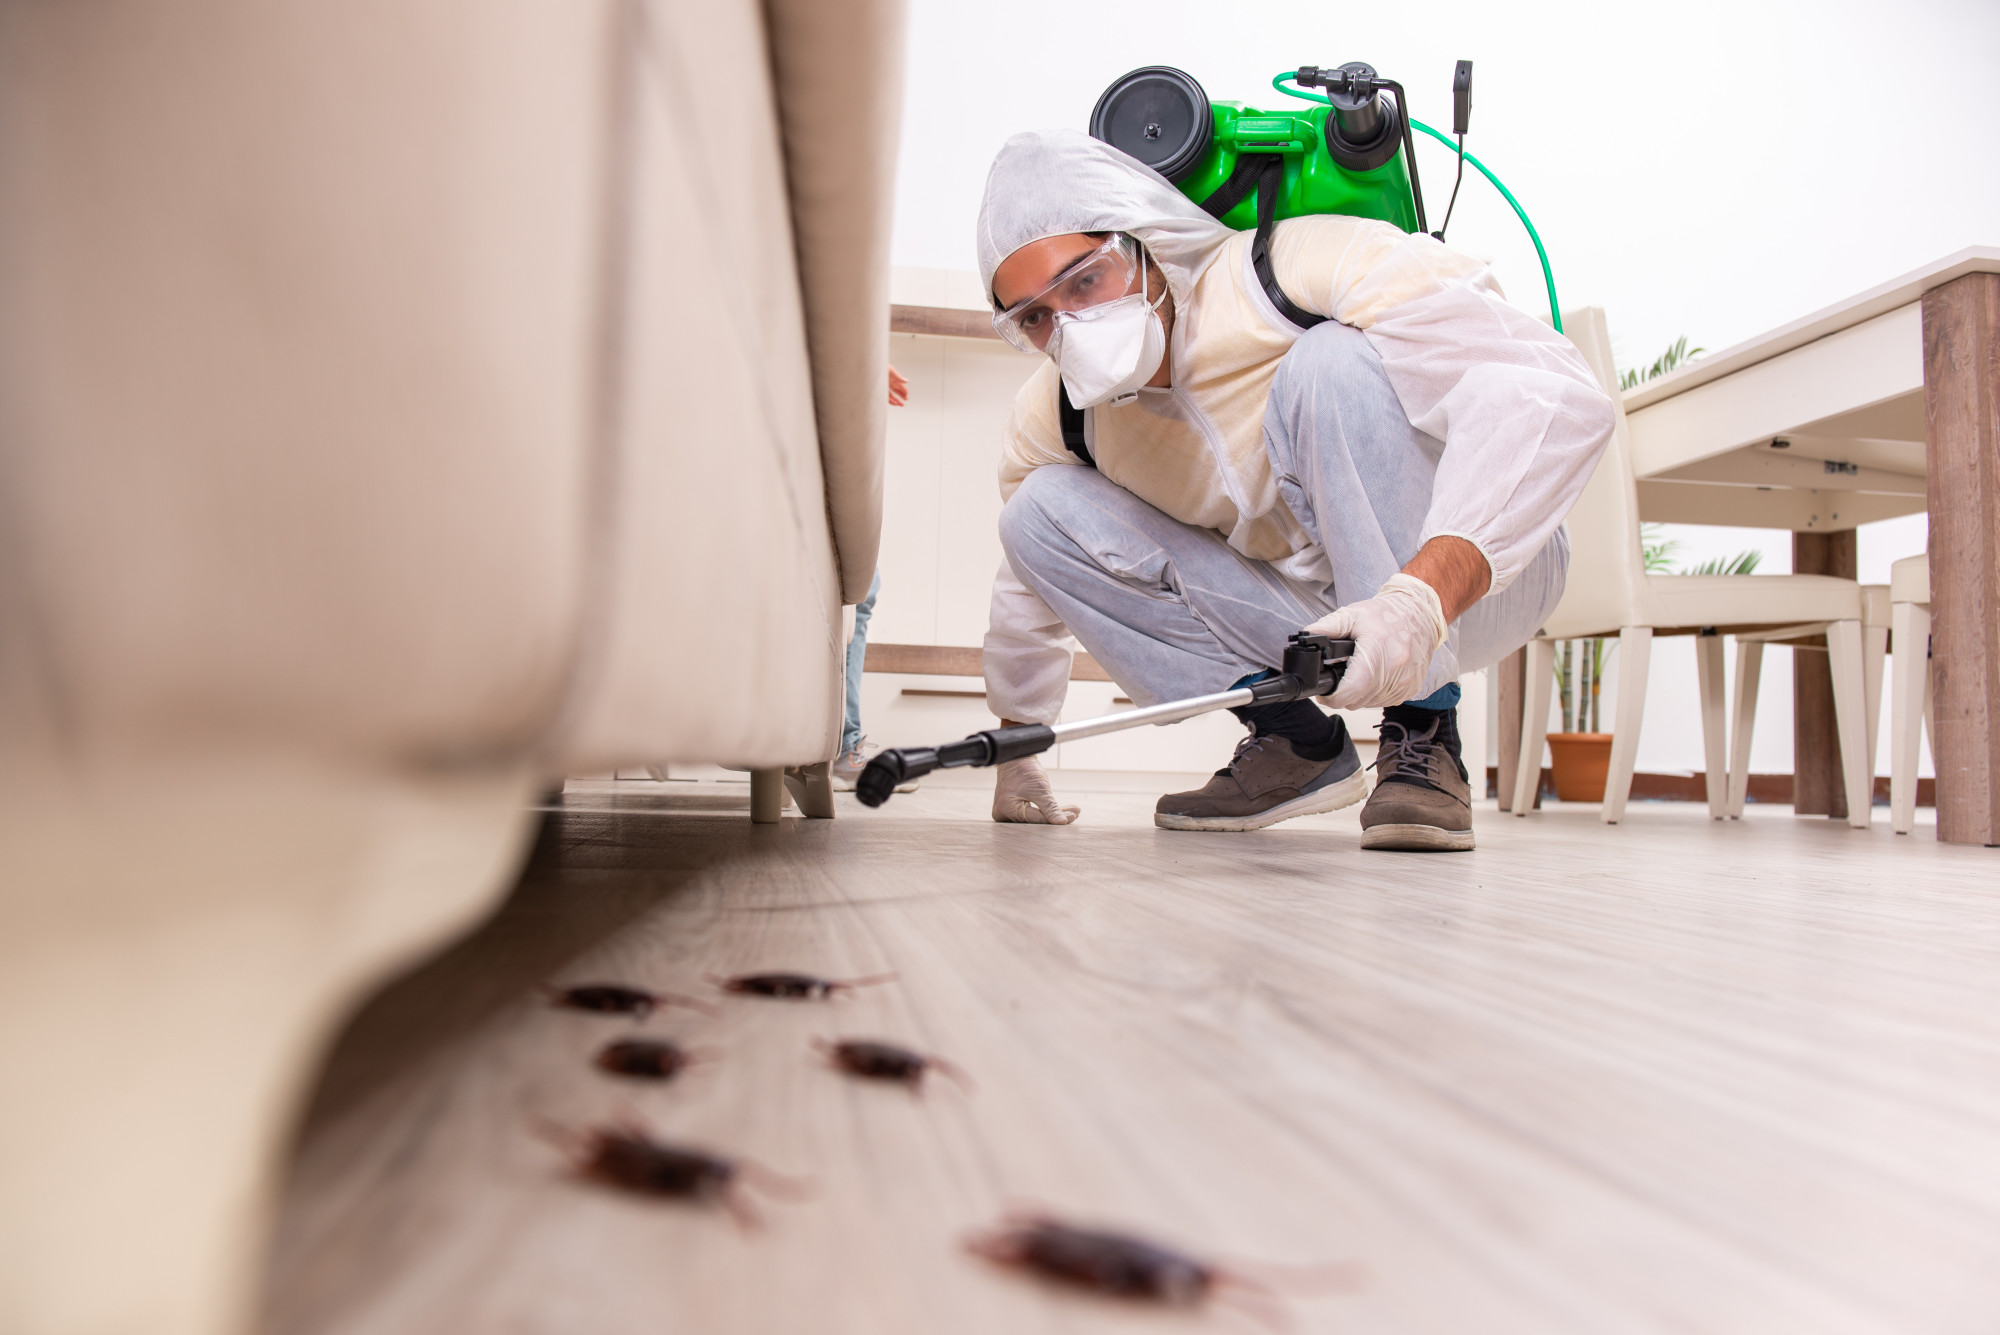 Are you on the hunt for the best pest control company in your area? This is how to choose the best services for your needs.